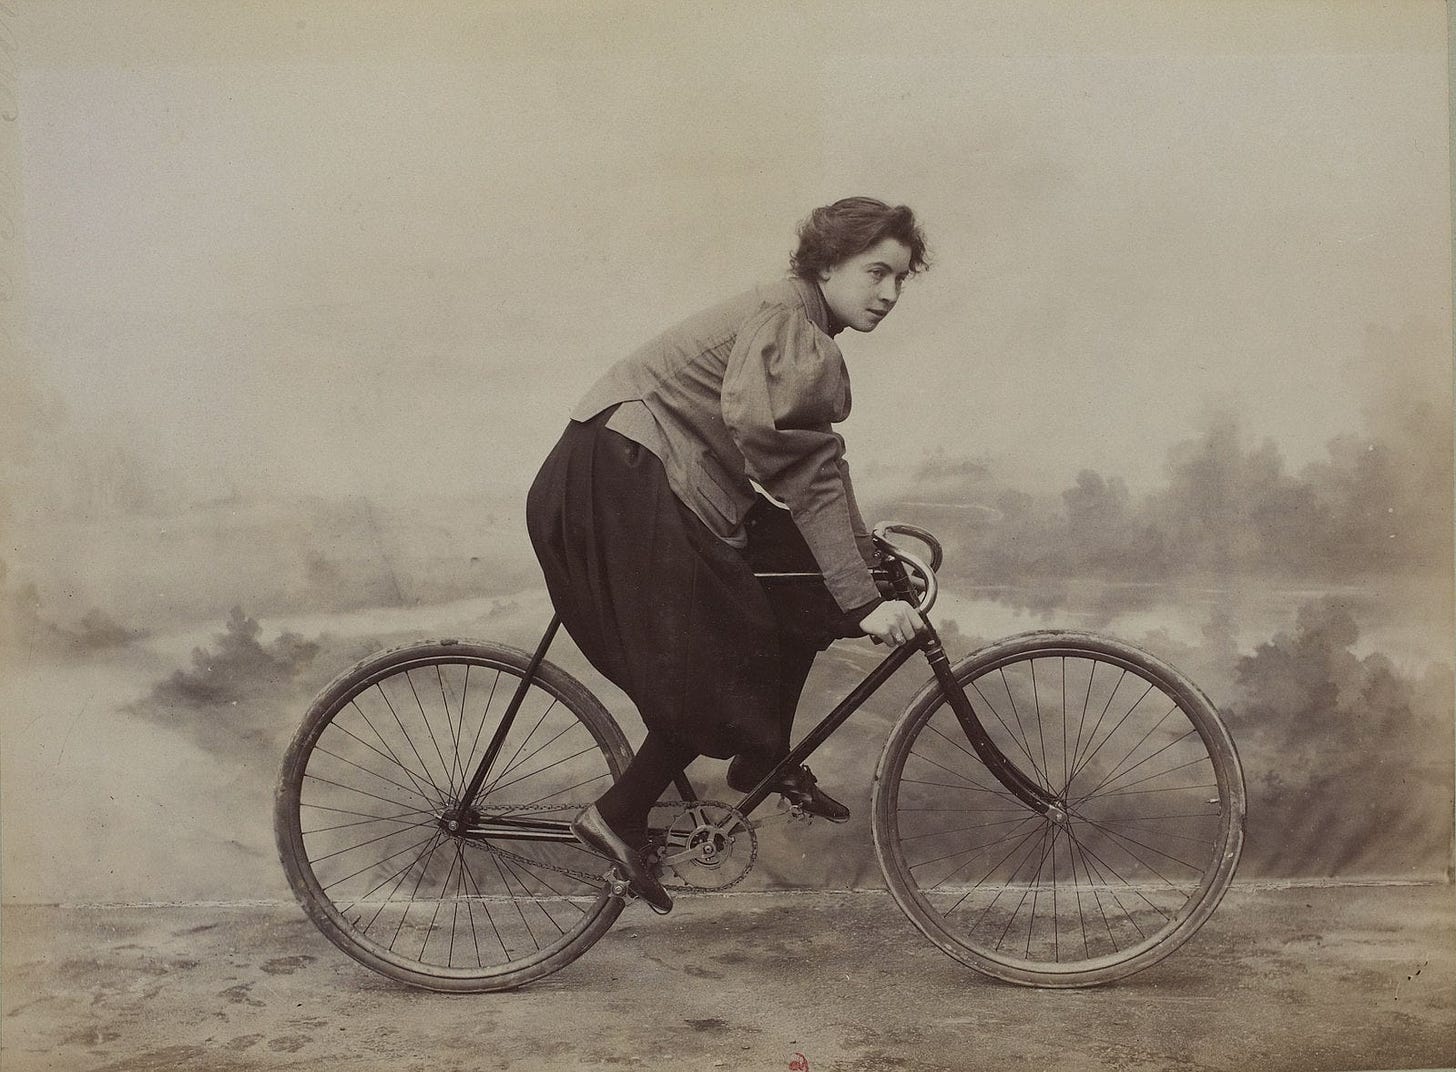 A historical photo of a French cyclist in bloomers.